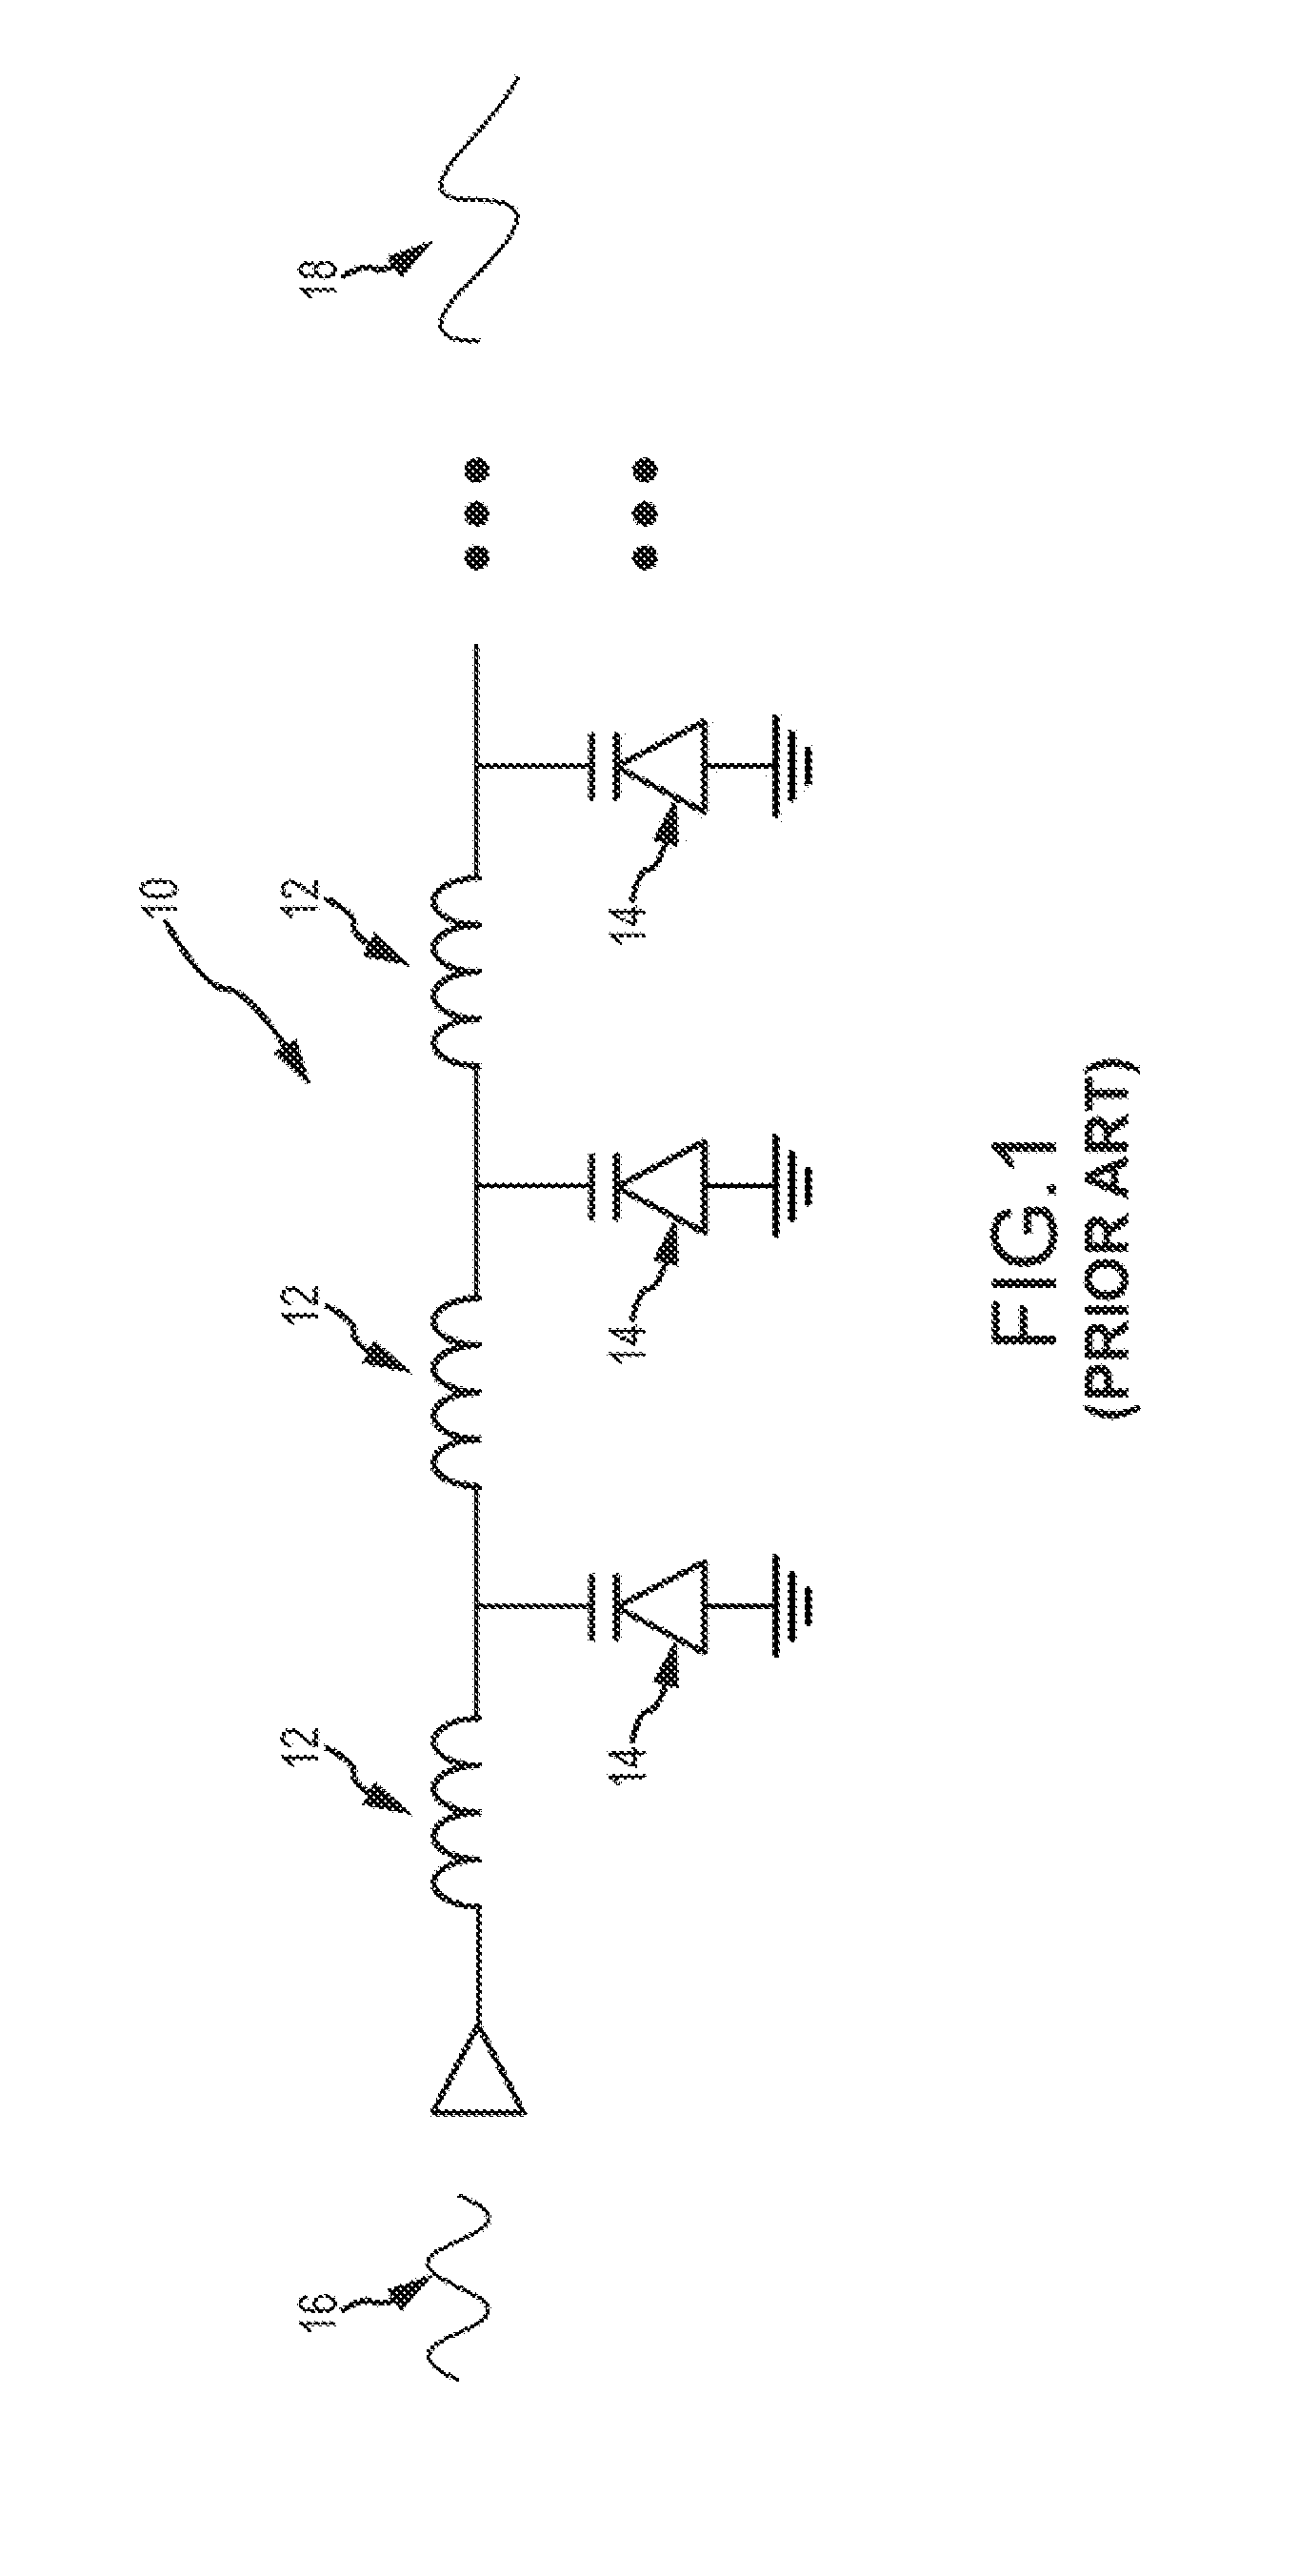 Noise reduction for non-linear transmission line (NLTL) frequency multiplier